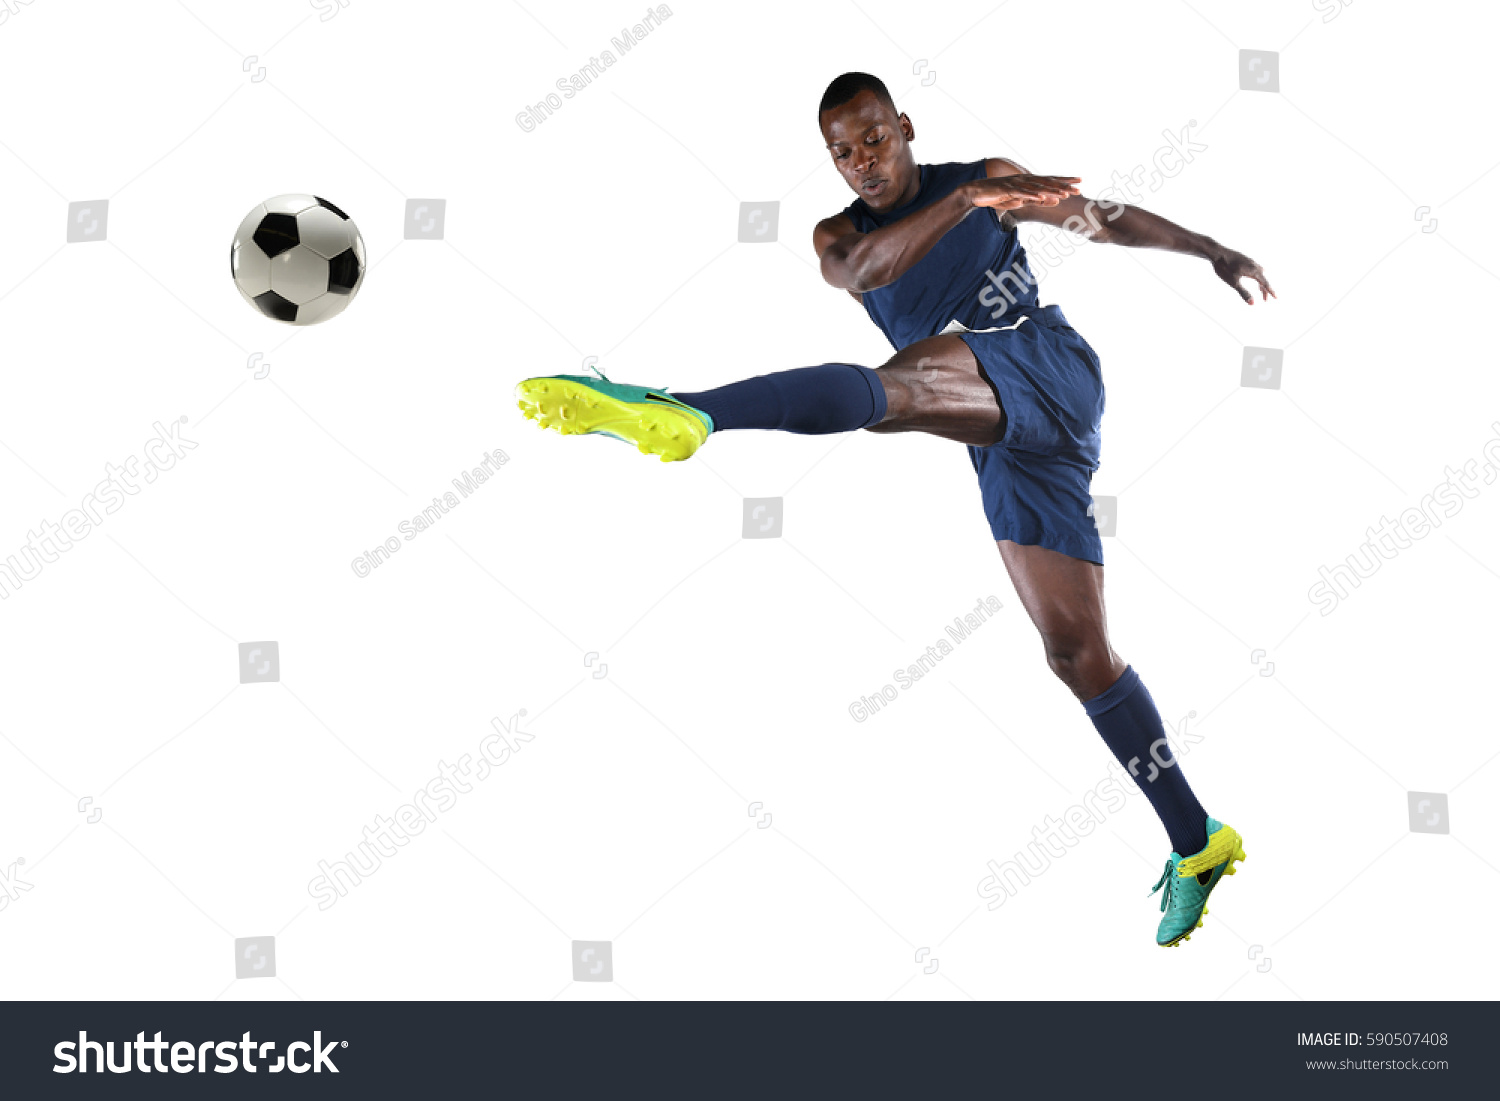 African American soccer player kicking ball isolated over white background #590507408